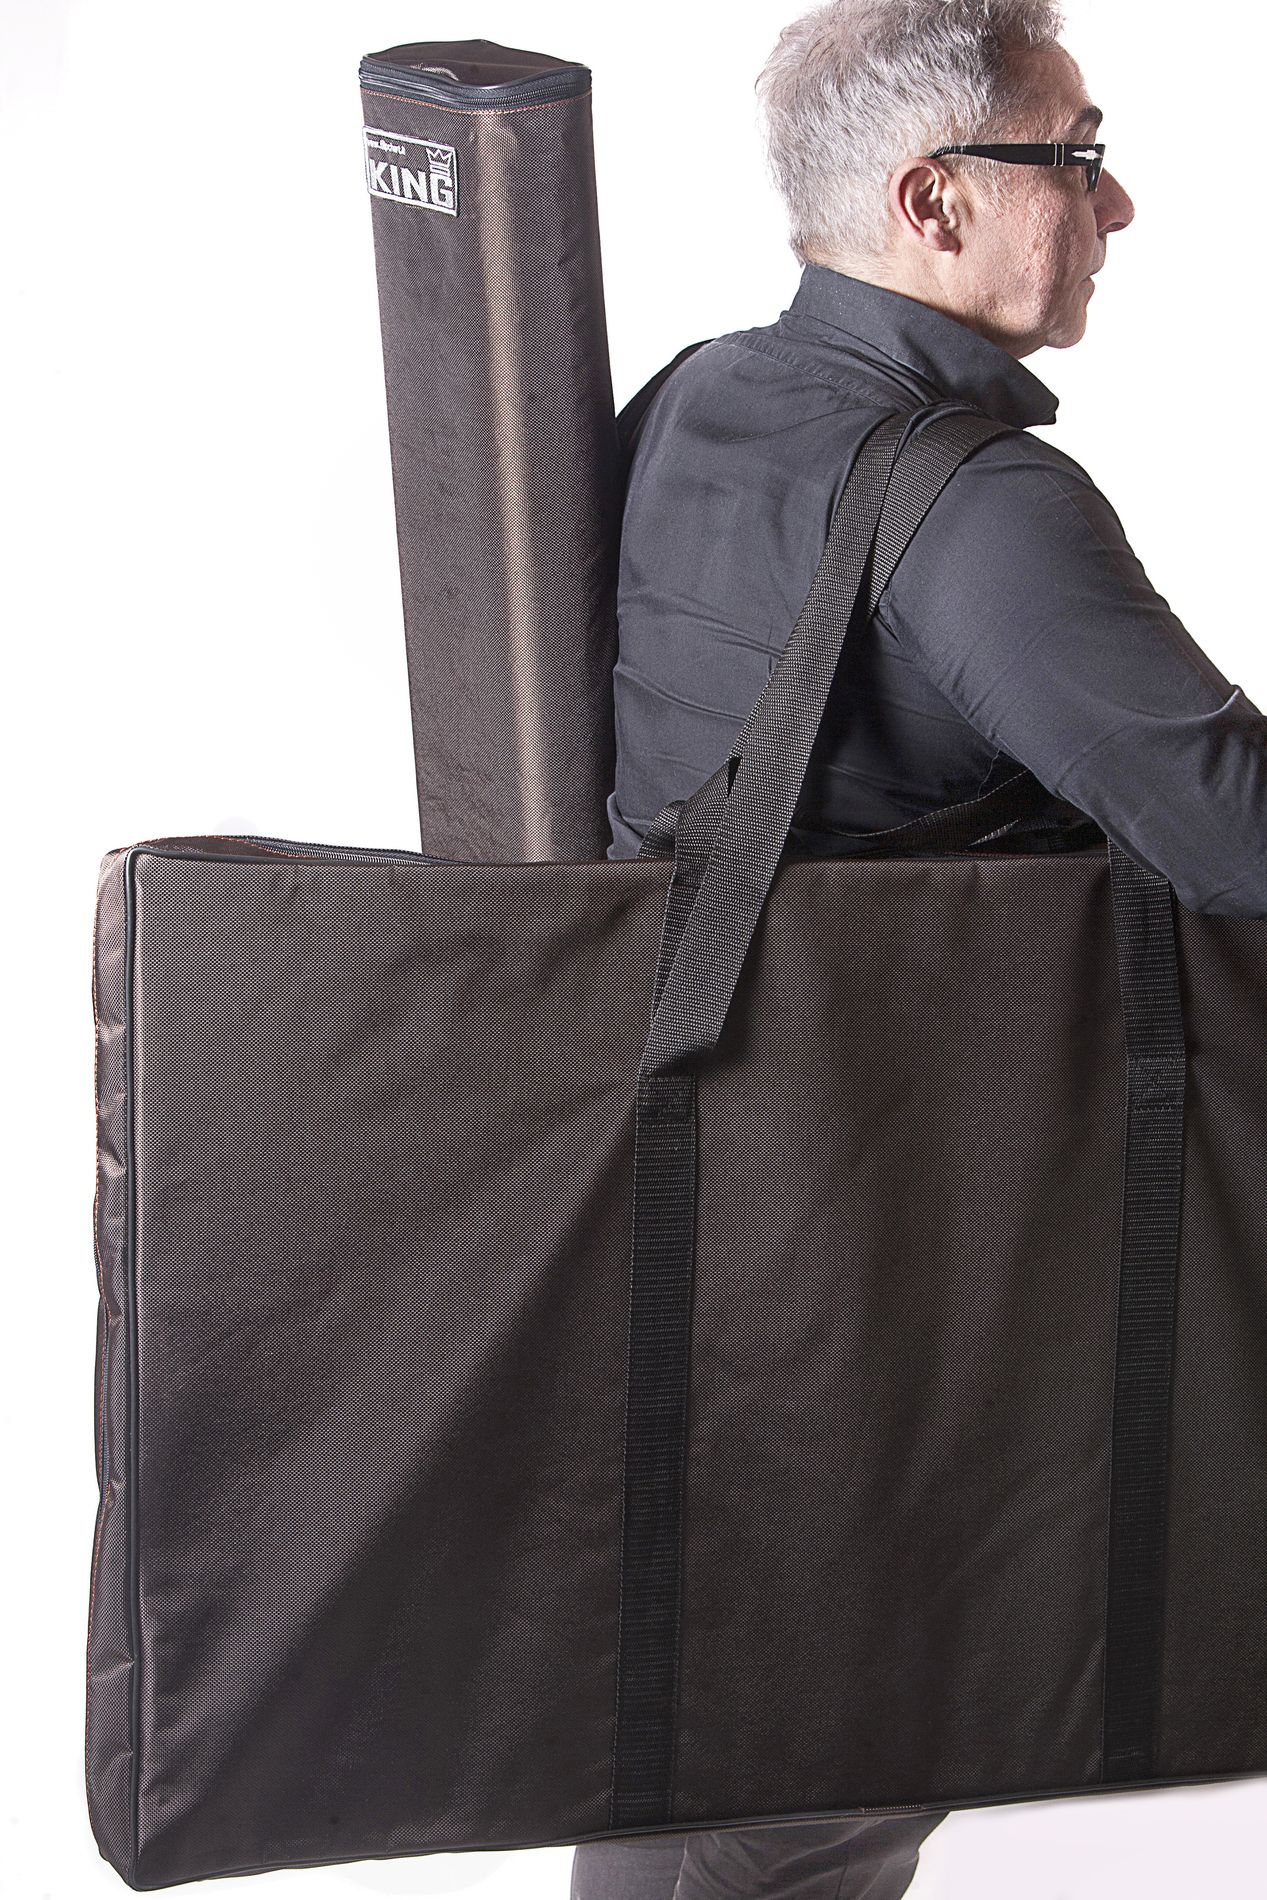 KING Flipchart.it - Carrying flipchart and paper rolls locked in bags